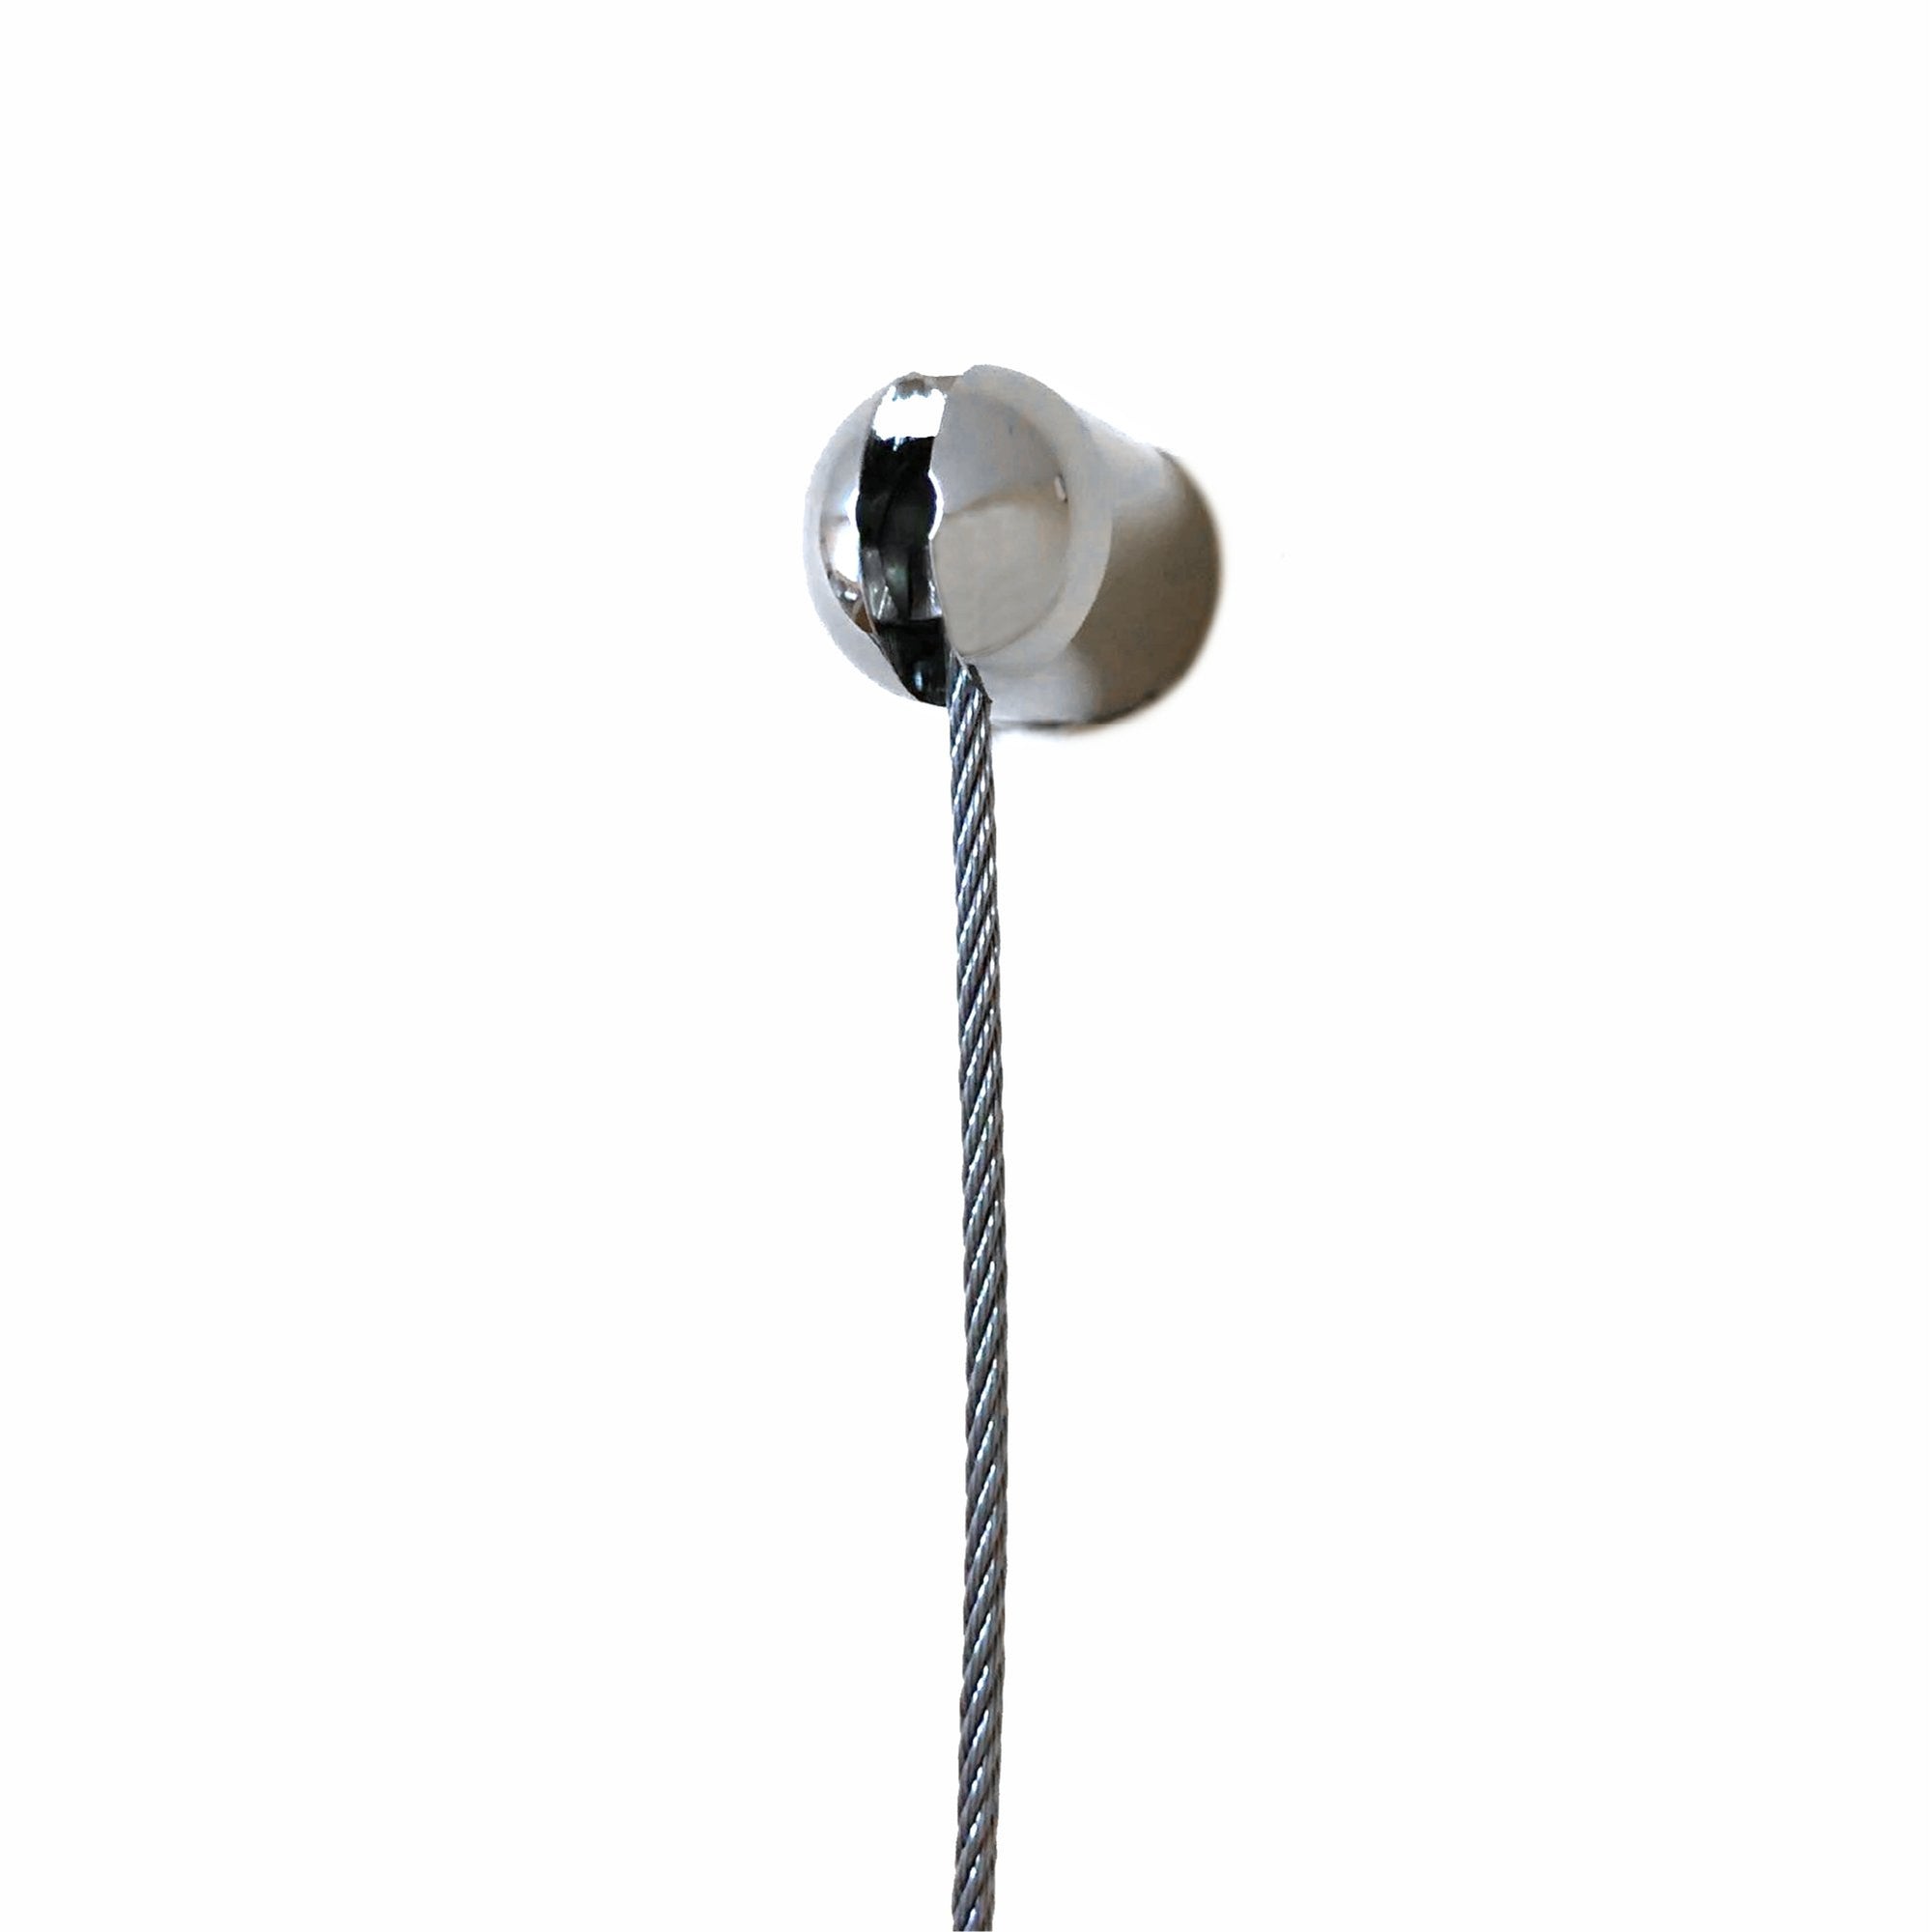 Stand Alone Gallery Steel Cable - S - GS3 - S72 - Picture Hang Solutions